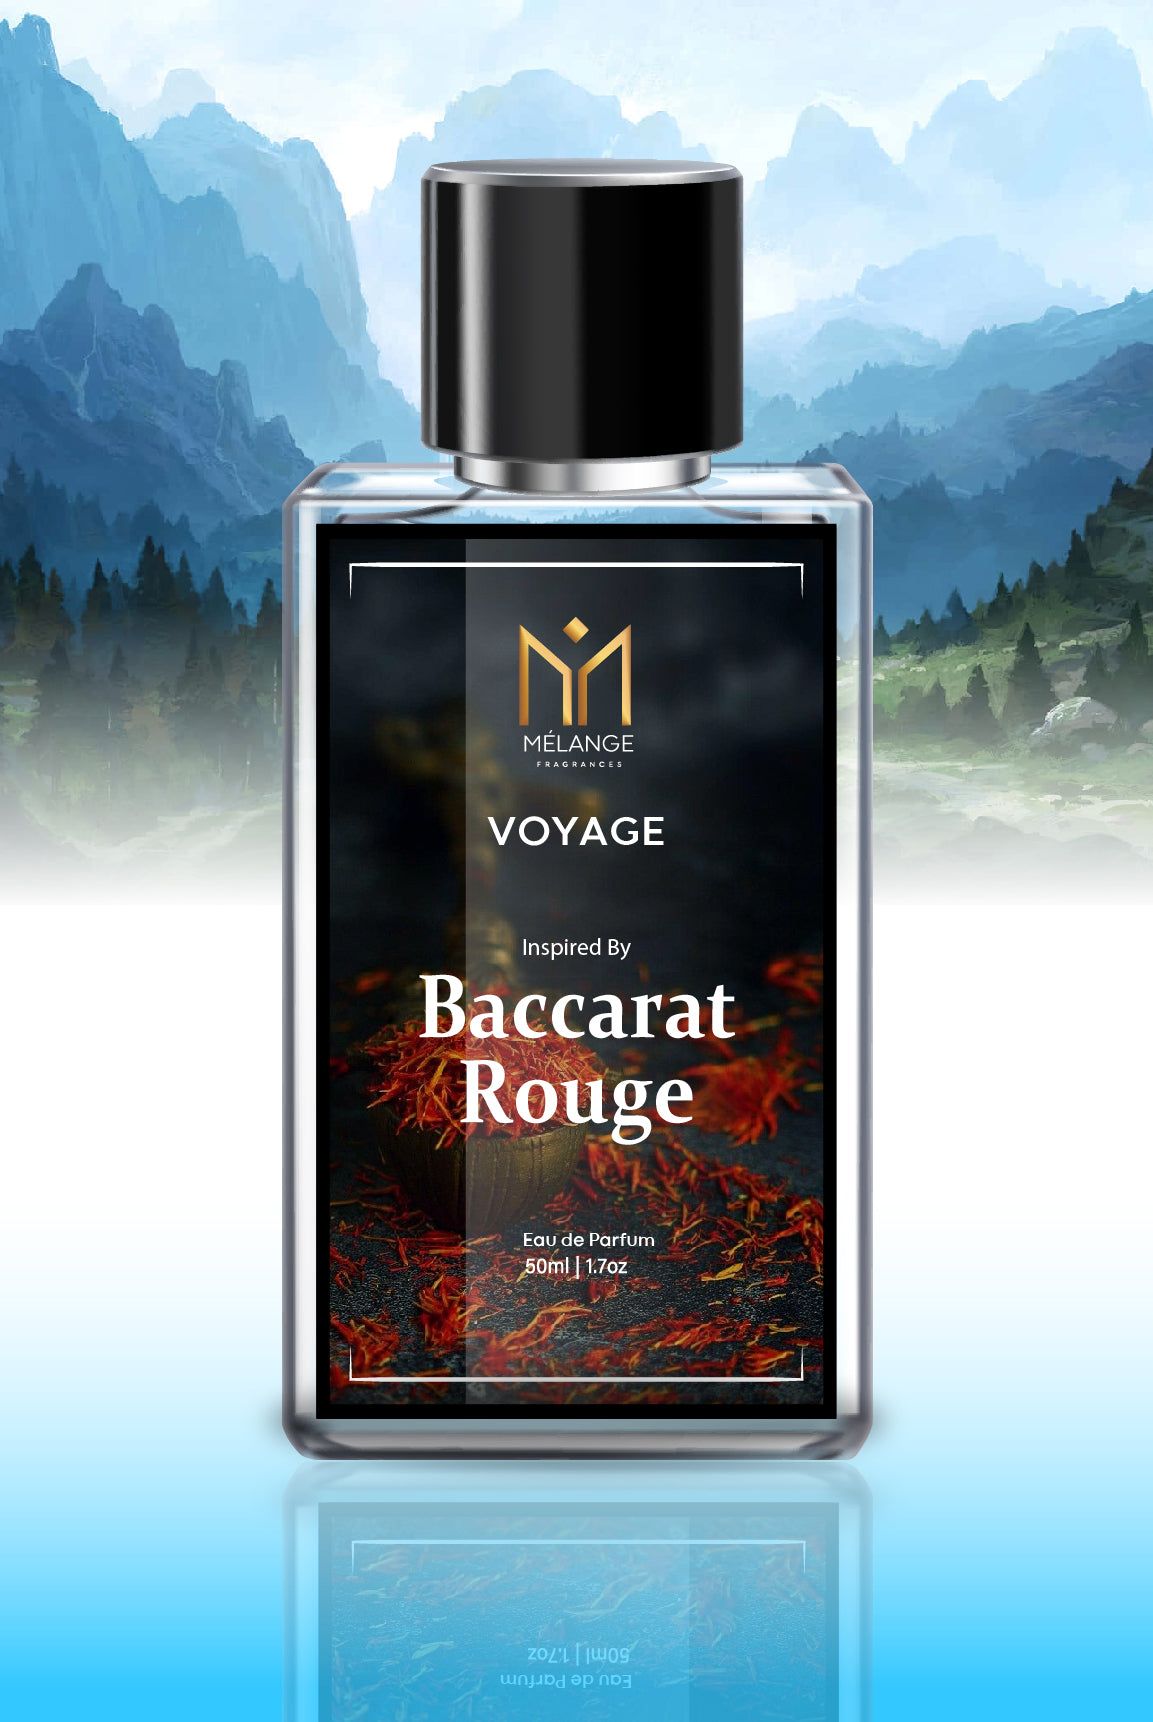 VOYAGE- Inspired By Baccarat Rouge